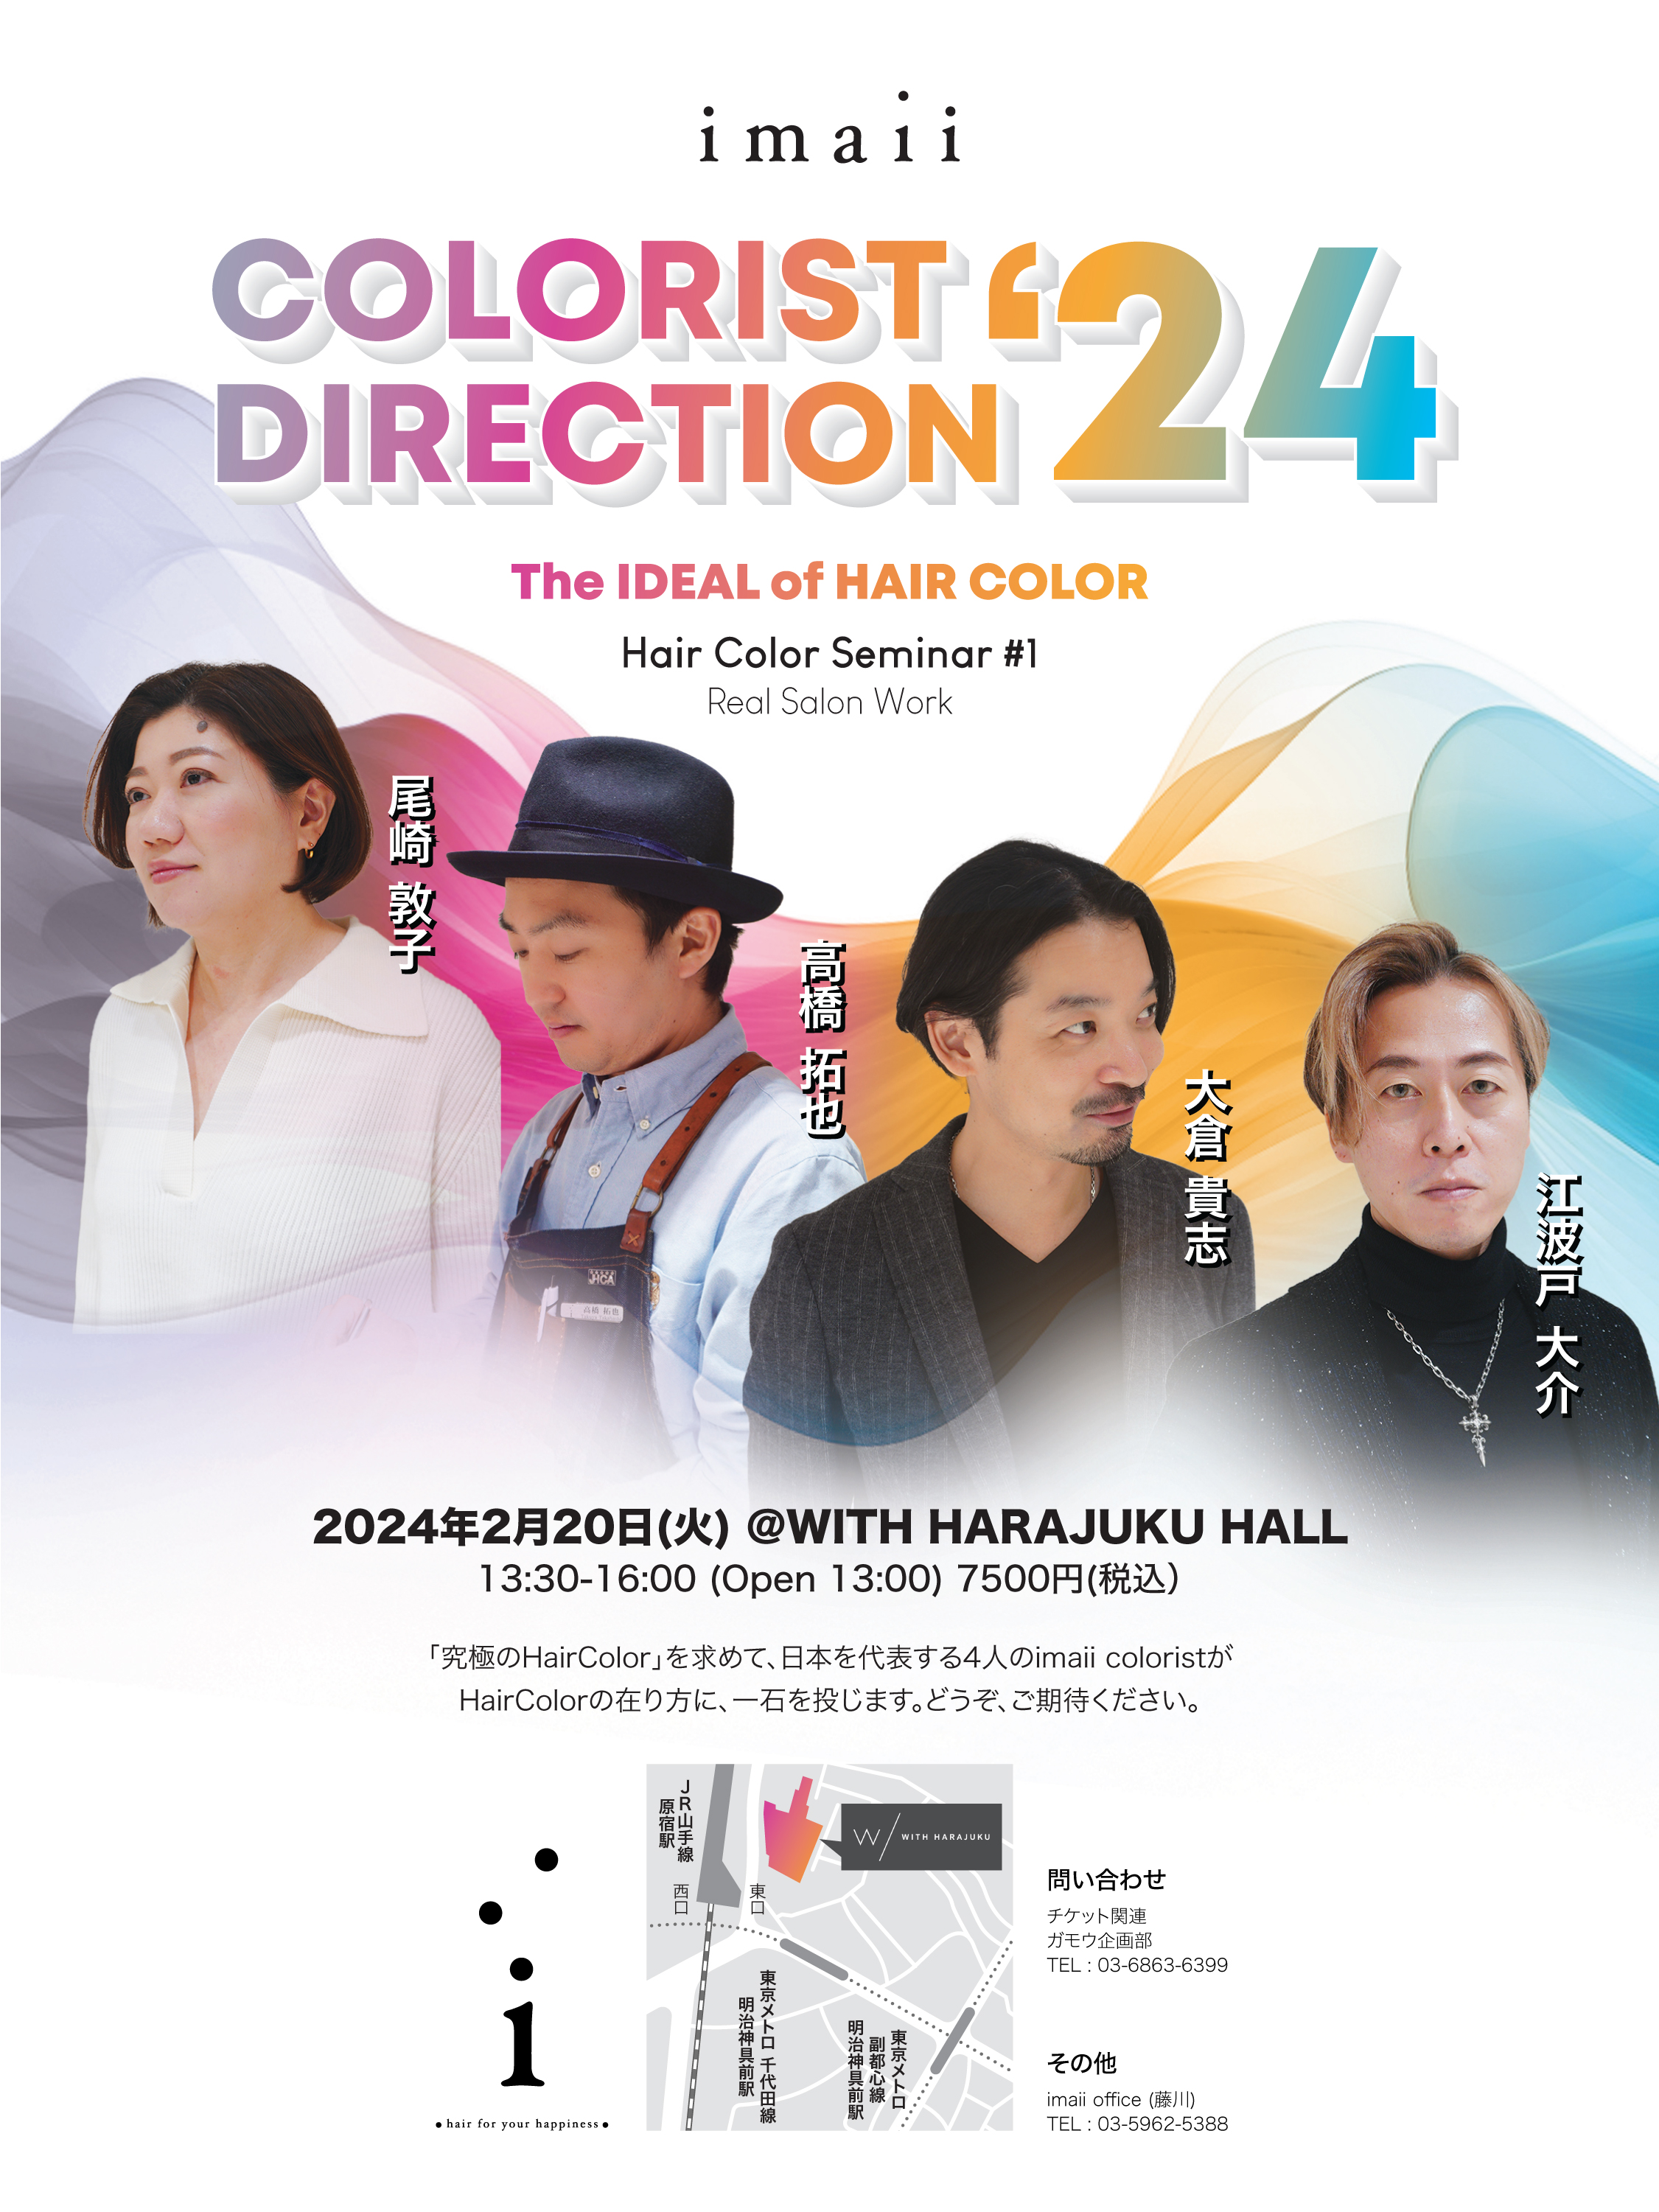 COLORIST DIRECTION '24 『THE IDEAL of HAIR COLOR』